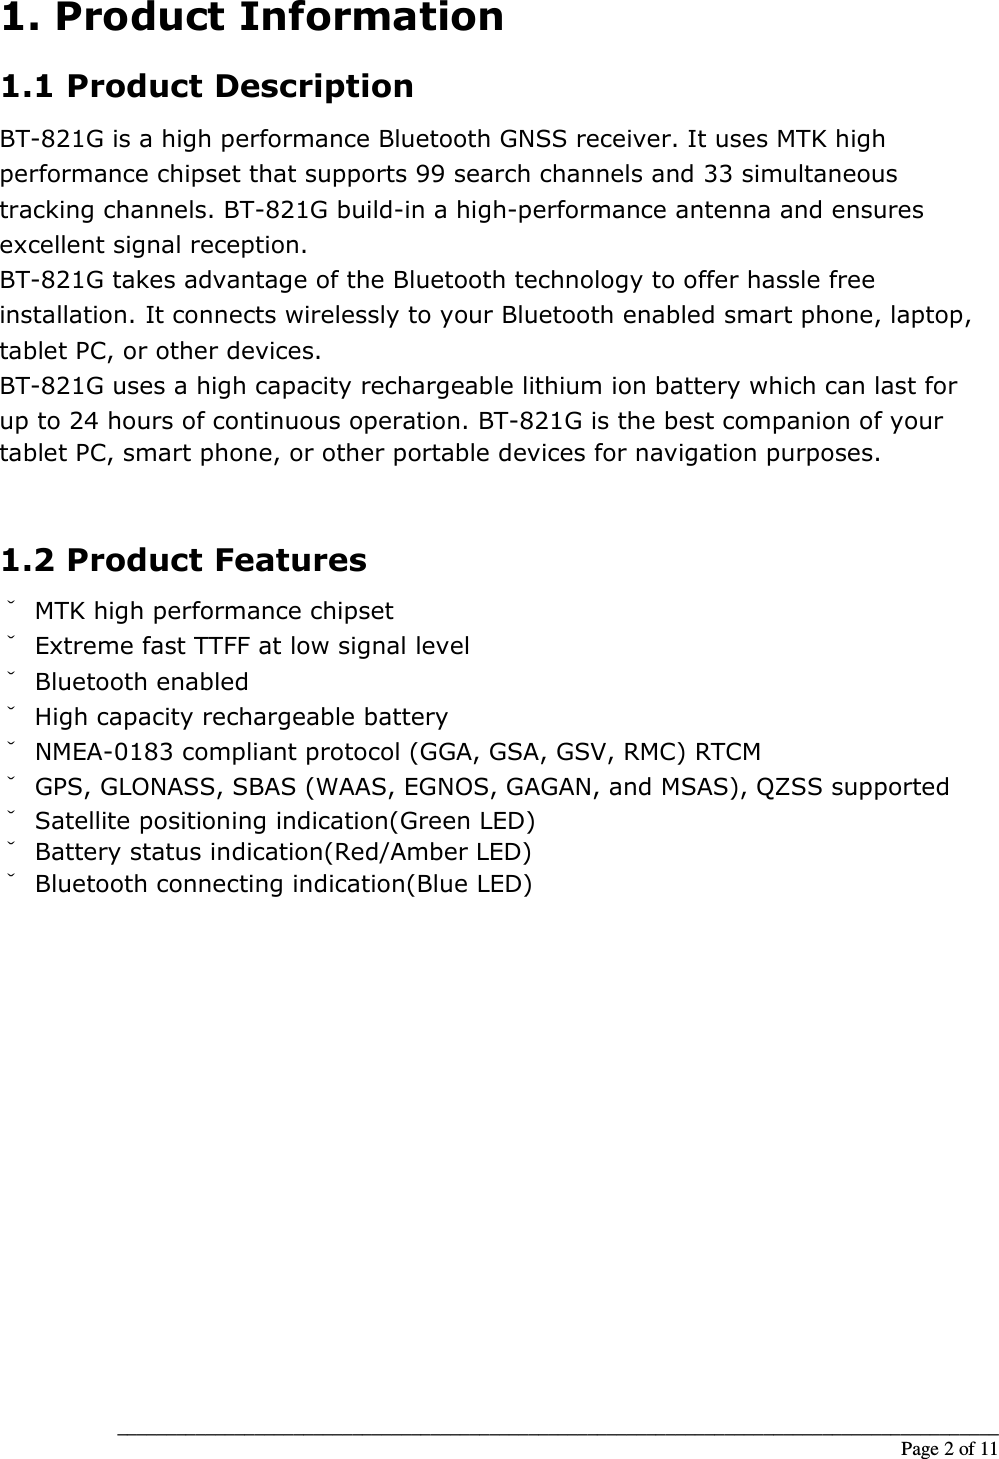 __________________________________________________________________________________________                                                                                                                                                             Page 2 of 11 1. Product Information 1.1 Product Description BT-821G is a high performance Bluetooth GNSS receiver. It uses MTK high performance chipset that supports 99 search channels and 33 simultaneous tracking channels. BT-821G build-in a high-performance antenna and ensures excellent signal reception. BT-821G takes advantage of the Bluetooth technology to offer hassle free installation. It connects wirelessly to your Bluetooth enabled smart phone, laptop, tablet PC, or other devices. BT-821G uses a high capacity rechargeable lithium ion battery which can last for up to 24 hours of continuous operation. BT-821G is the best companion of your tablet PC, smart phone, or other portable devices for navigation purposes.   1.2 Product Features ˇ  MTK high performance chipset ˇ Extreme fast TTFF at low signal level ˇ Bluetooth enabled ˇ High capacity rechargeable battery ˇ NMEA-0183 compliant protocol (GGA, GSA, GSV, RMC) RTCM ˇ GPS, GLONASS, SBAS (WAAS, EGNOS, GAGAN, and MSAS), QZSS supported ˇ Satellite positioning indication(Green LED) ˇ Battery status indication(Red/Amber LED) ˇ Bluetooth connecting indication(Blue LED)                    